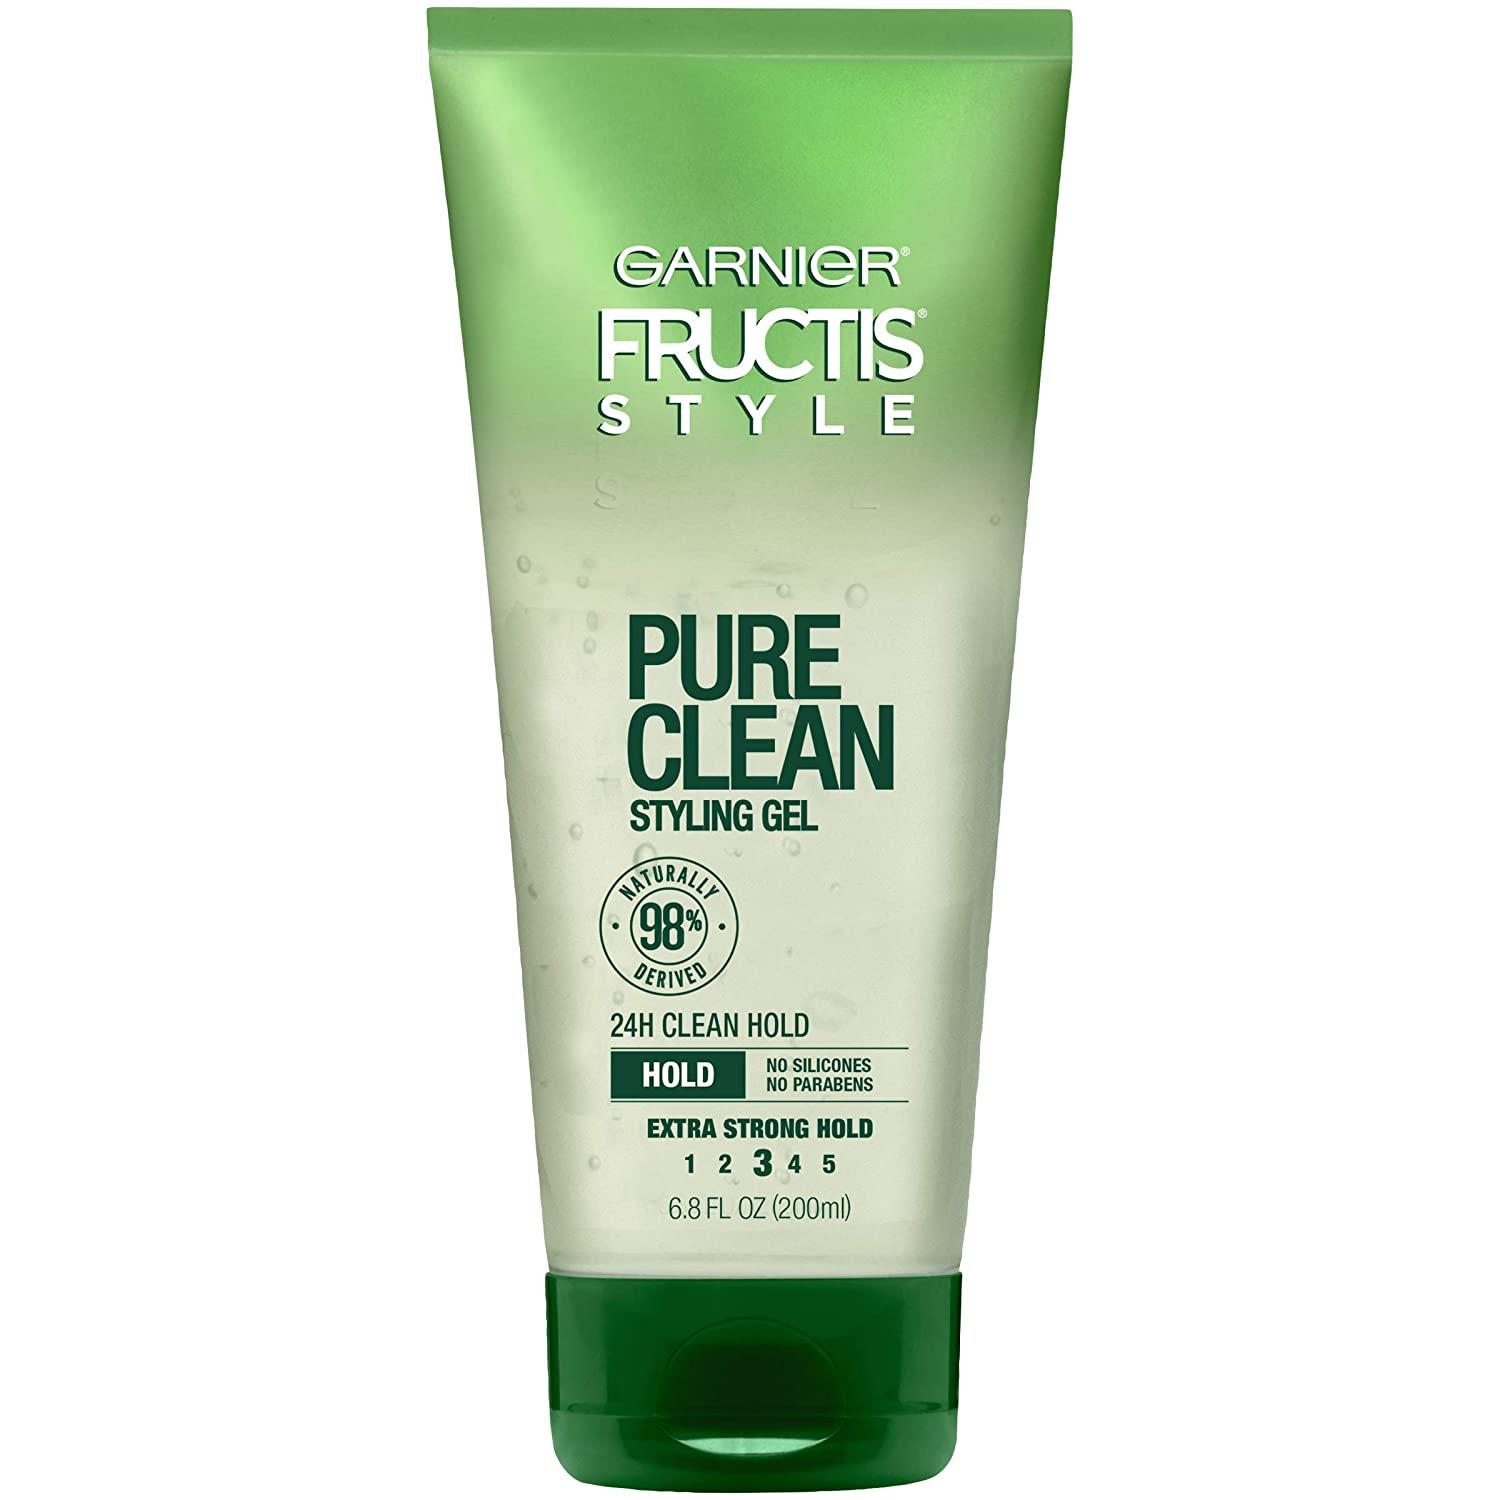 3x Garnier Fructis Style Pure Clean Styling Gel for $6.46 Shipped